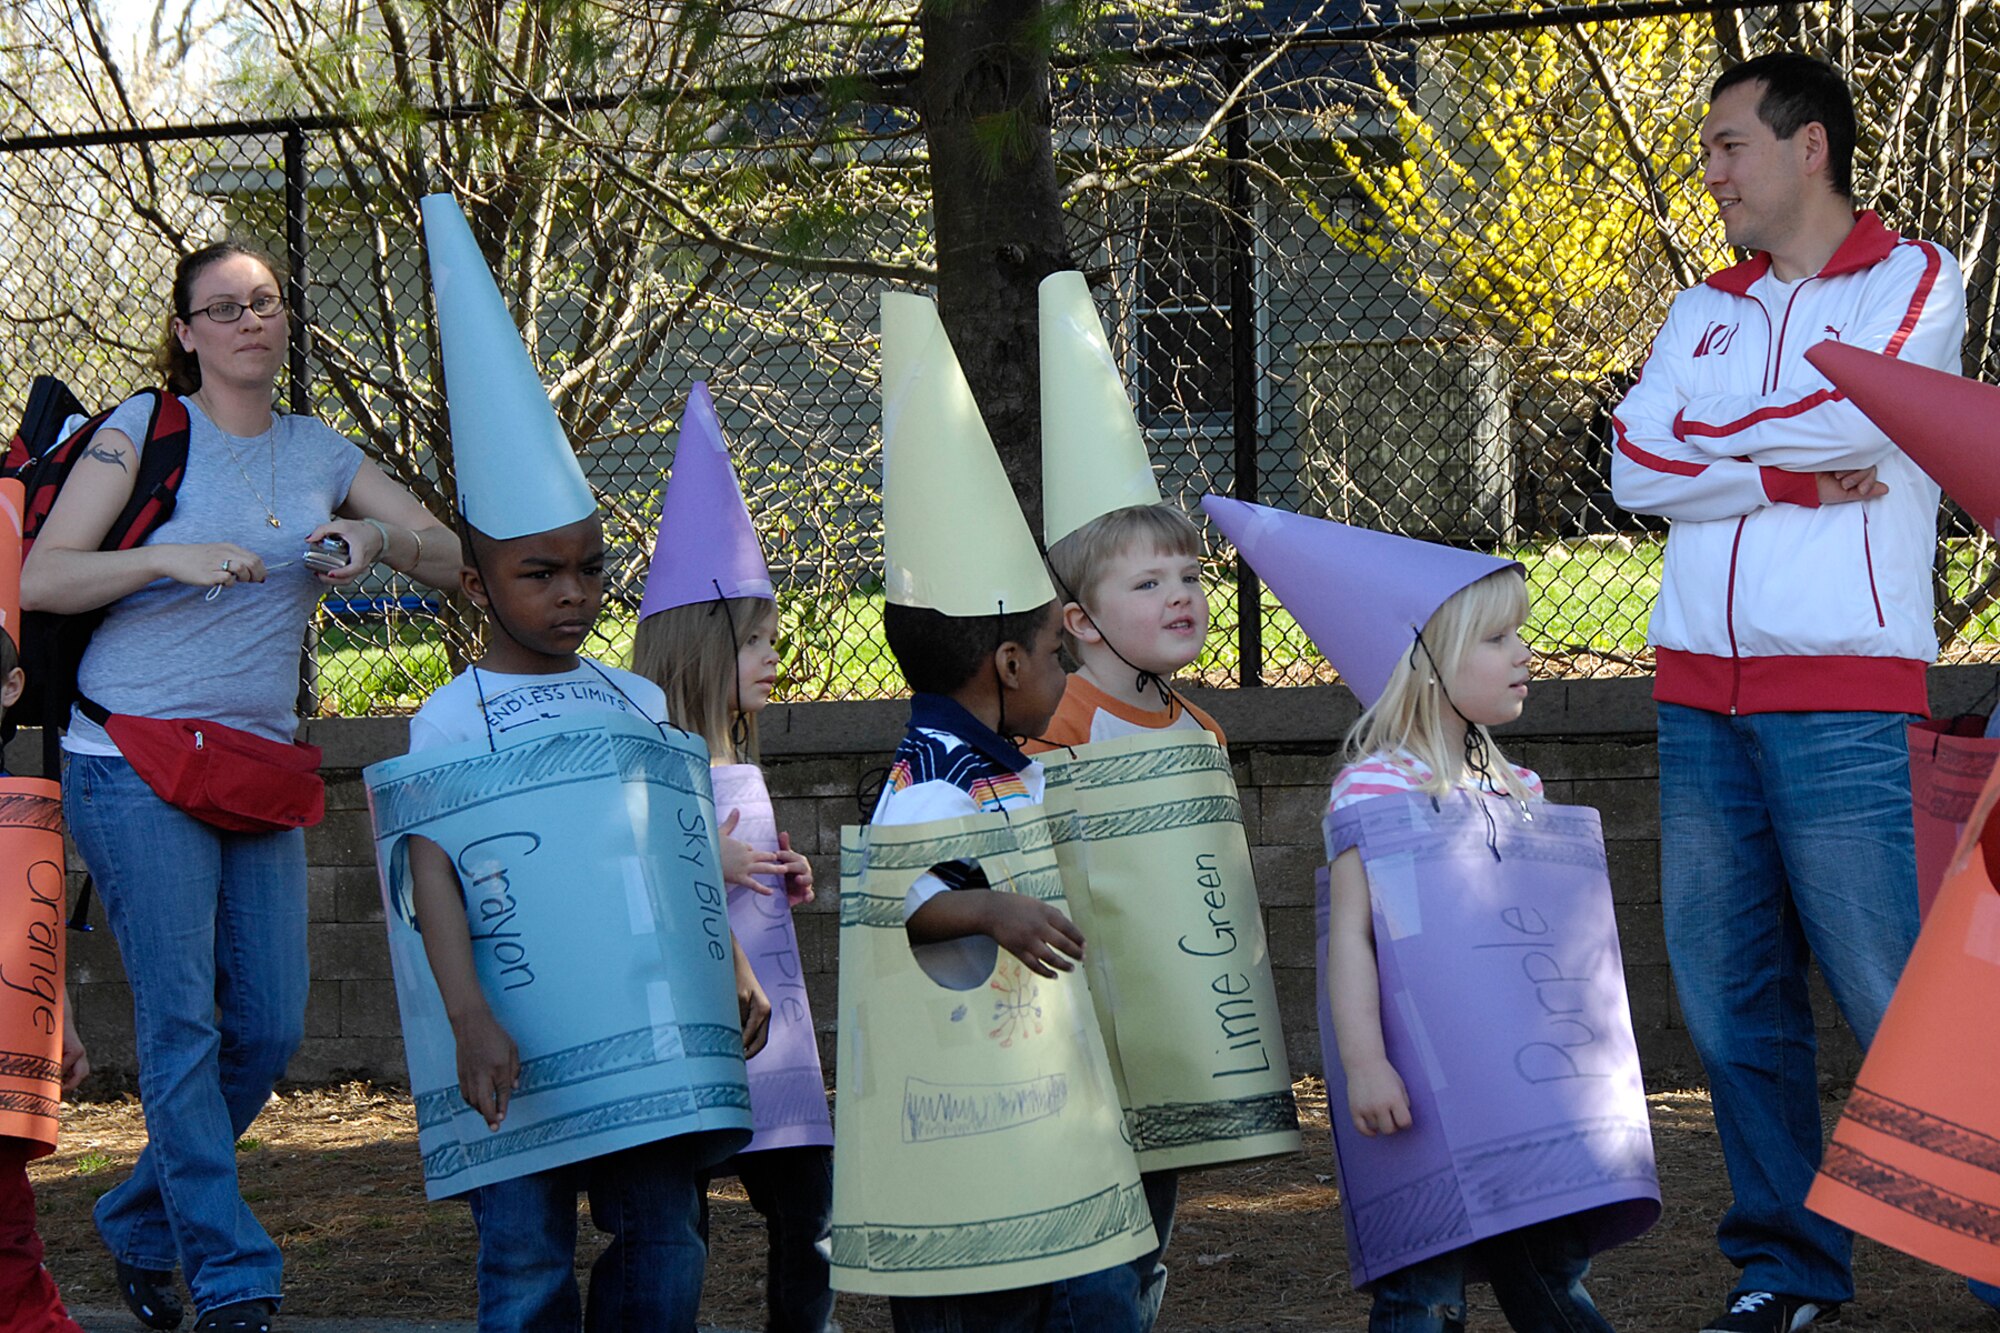 HANSCOM AIR FORCE BASE, Mass. – Children enrolled in the Hanscom Child Development Center show off their colors during the Fantastic Floats parade on April 24. The parade was part of the CDC’s Month of the Military Child celebrations. (U.S. Air Force photo by Linda LaBonte Britt)